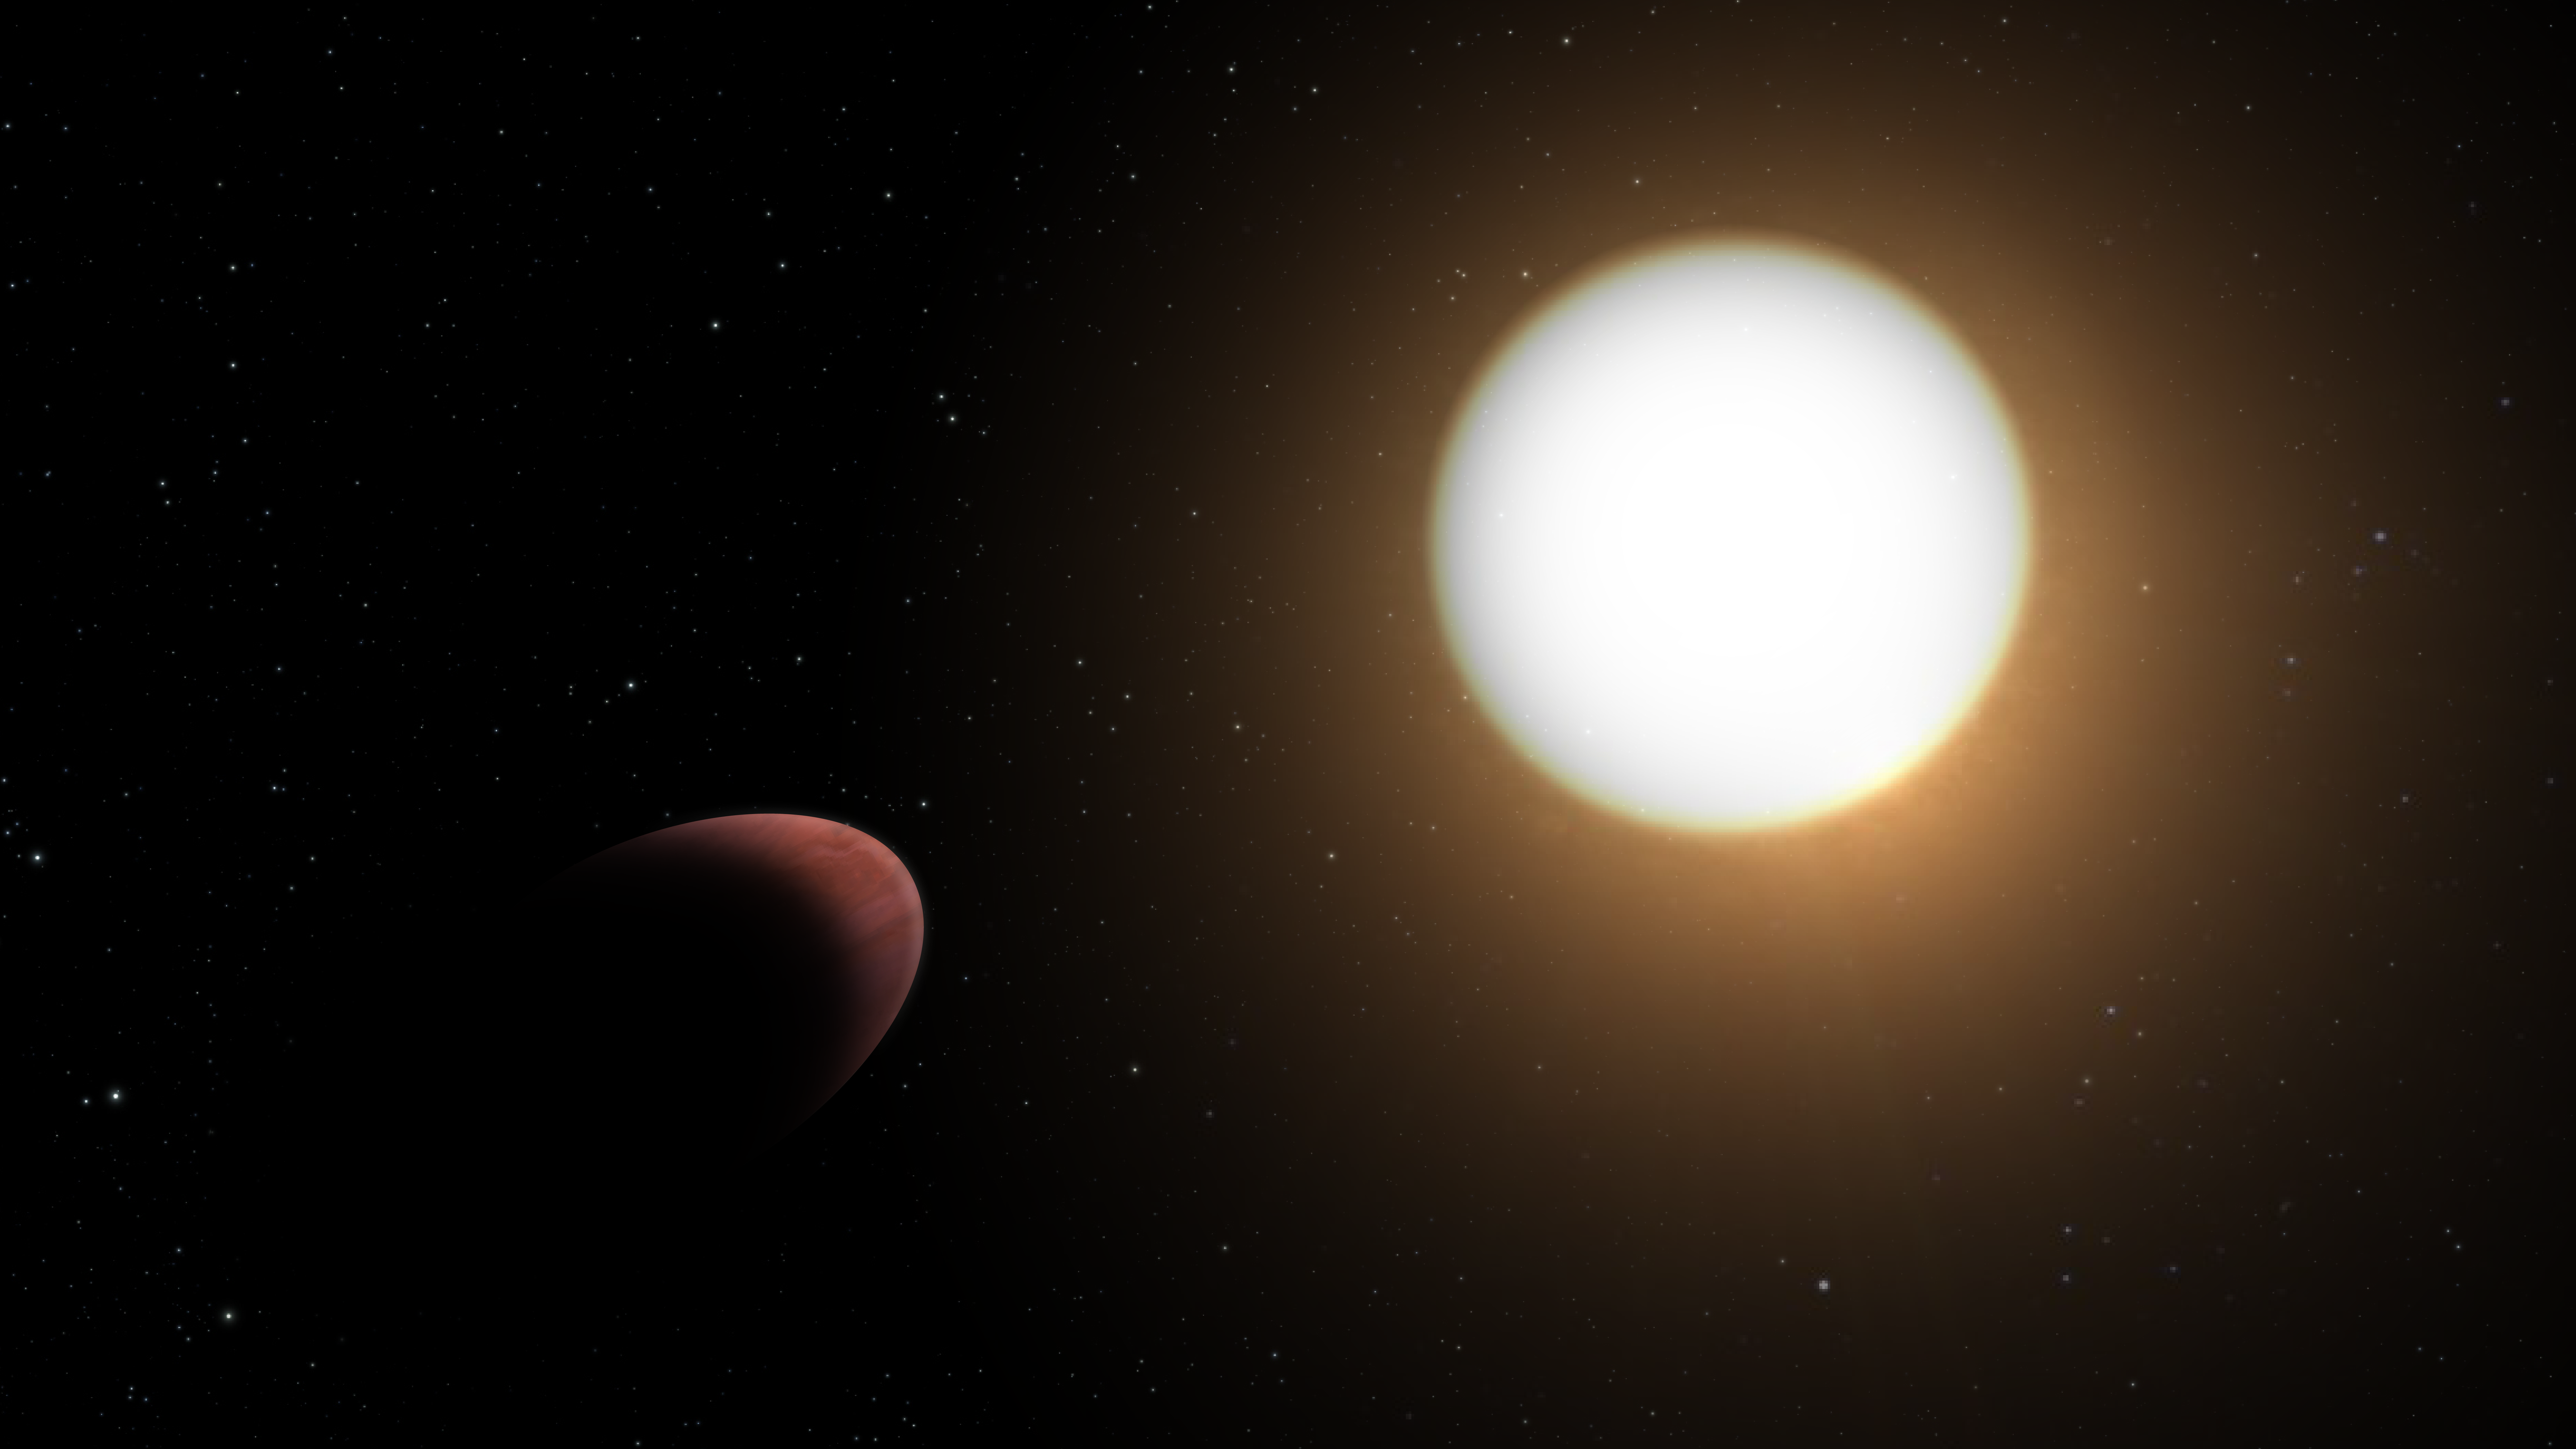 ESA's exoplanet hunter detects deformed planet for the first time